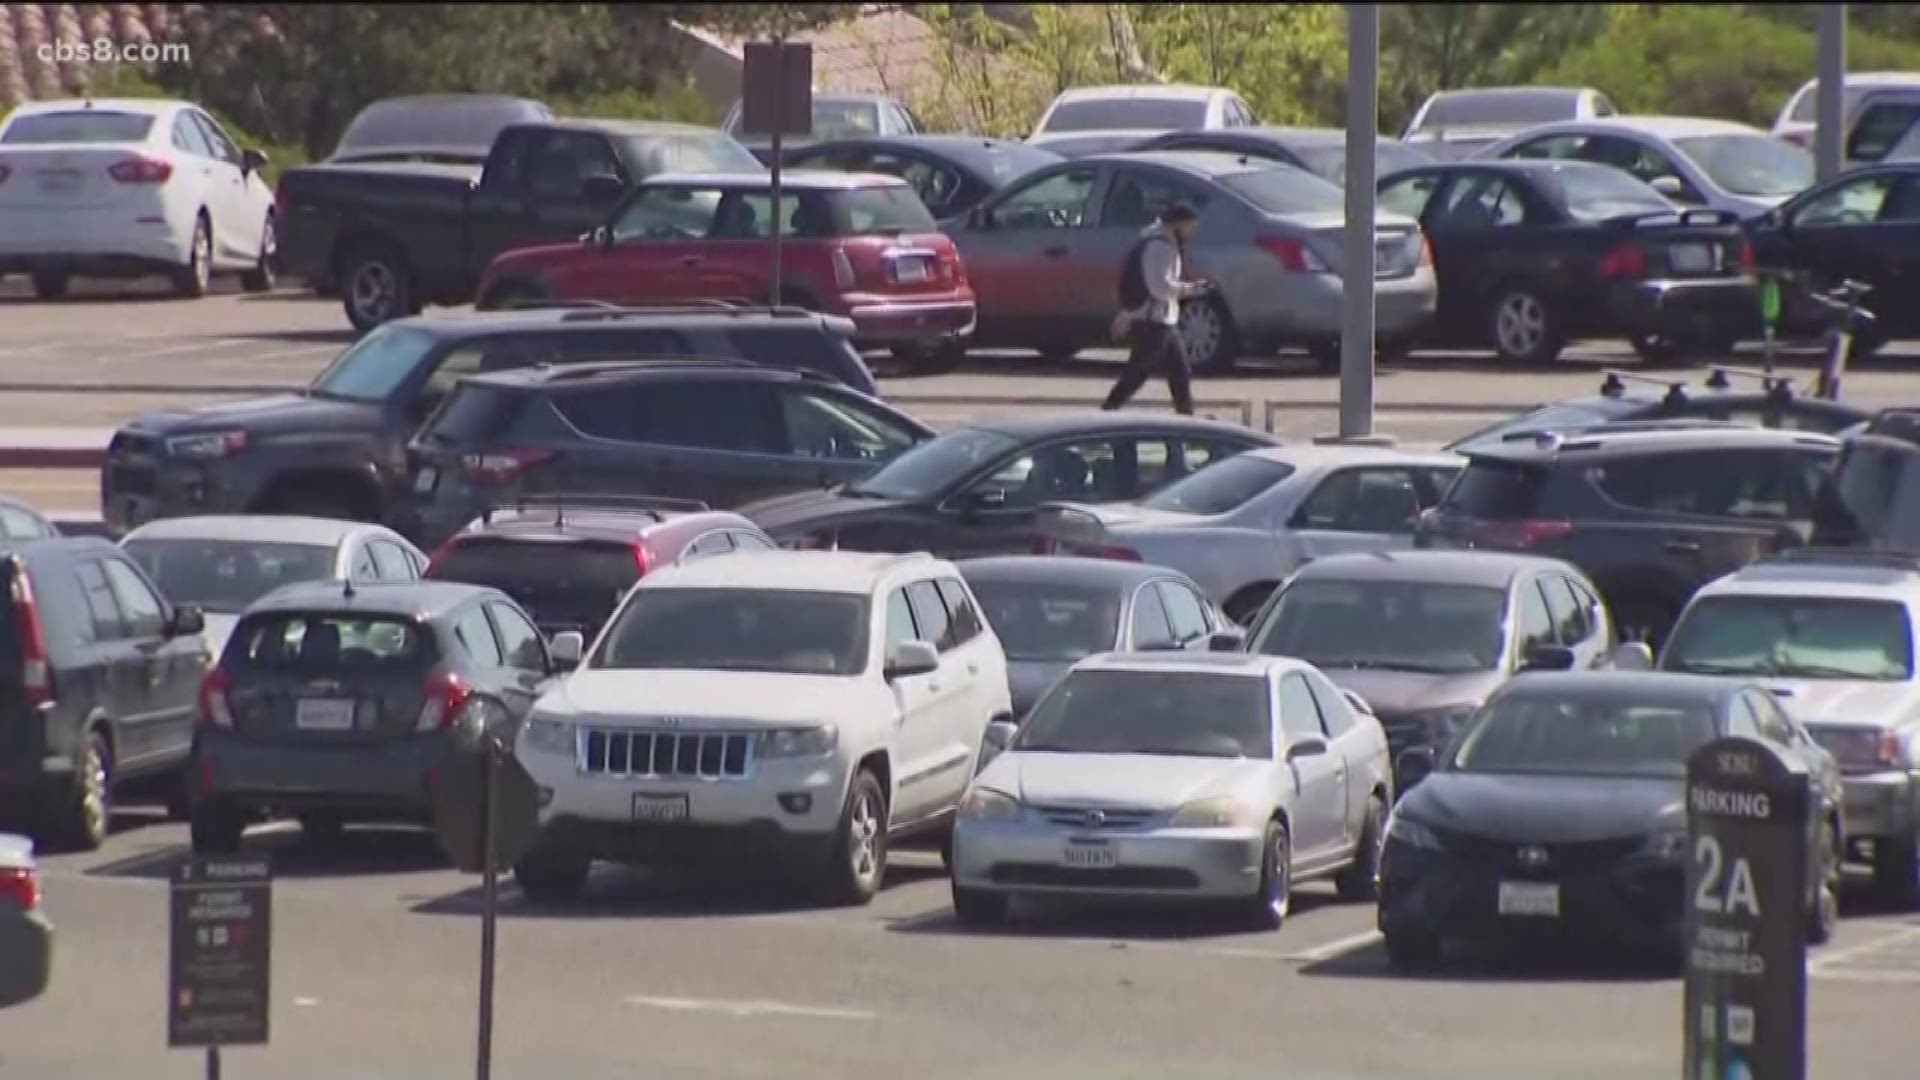 The university says there are not enough parking spaces on campus to allow freshmen to bring cars to campus anymore.